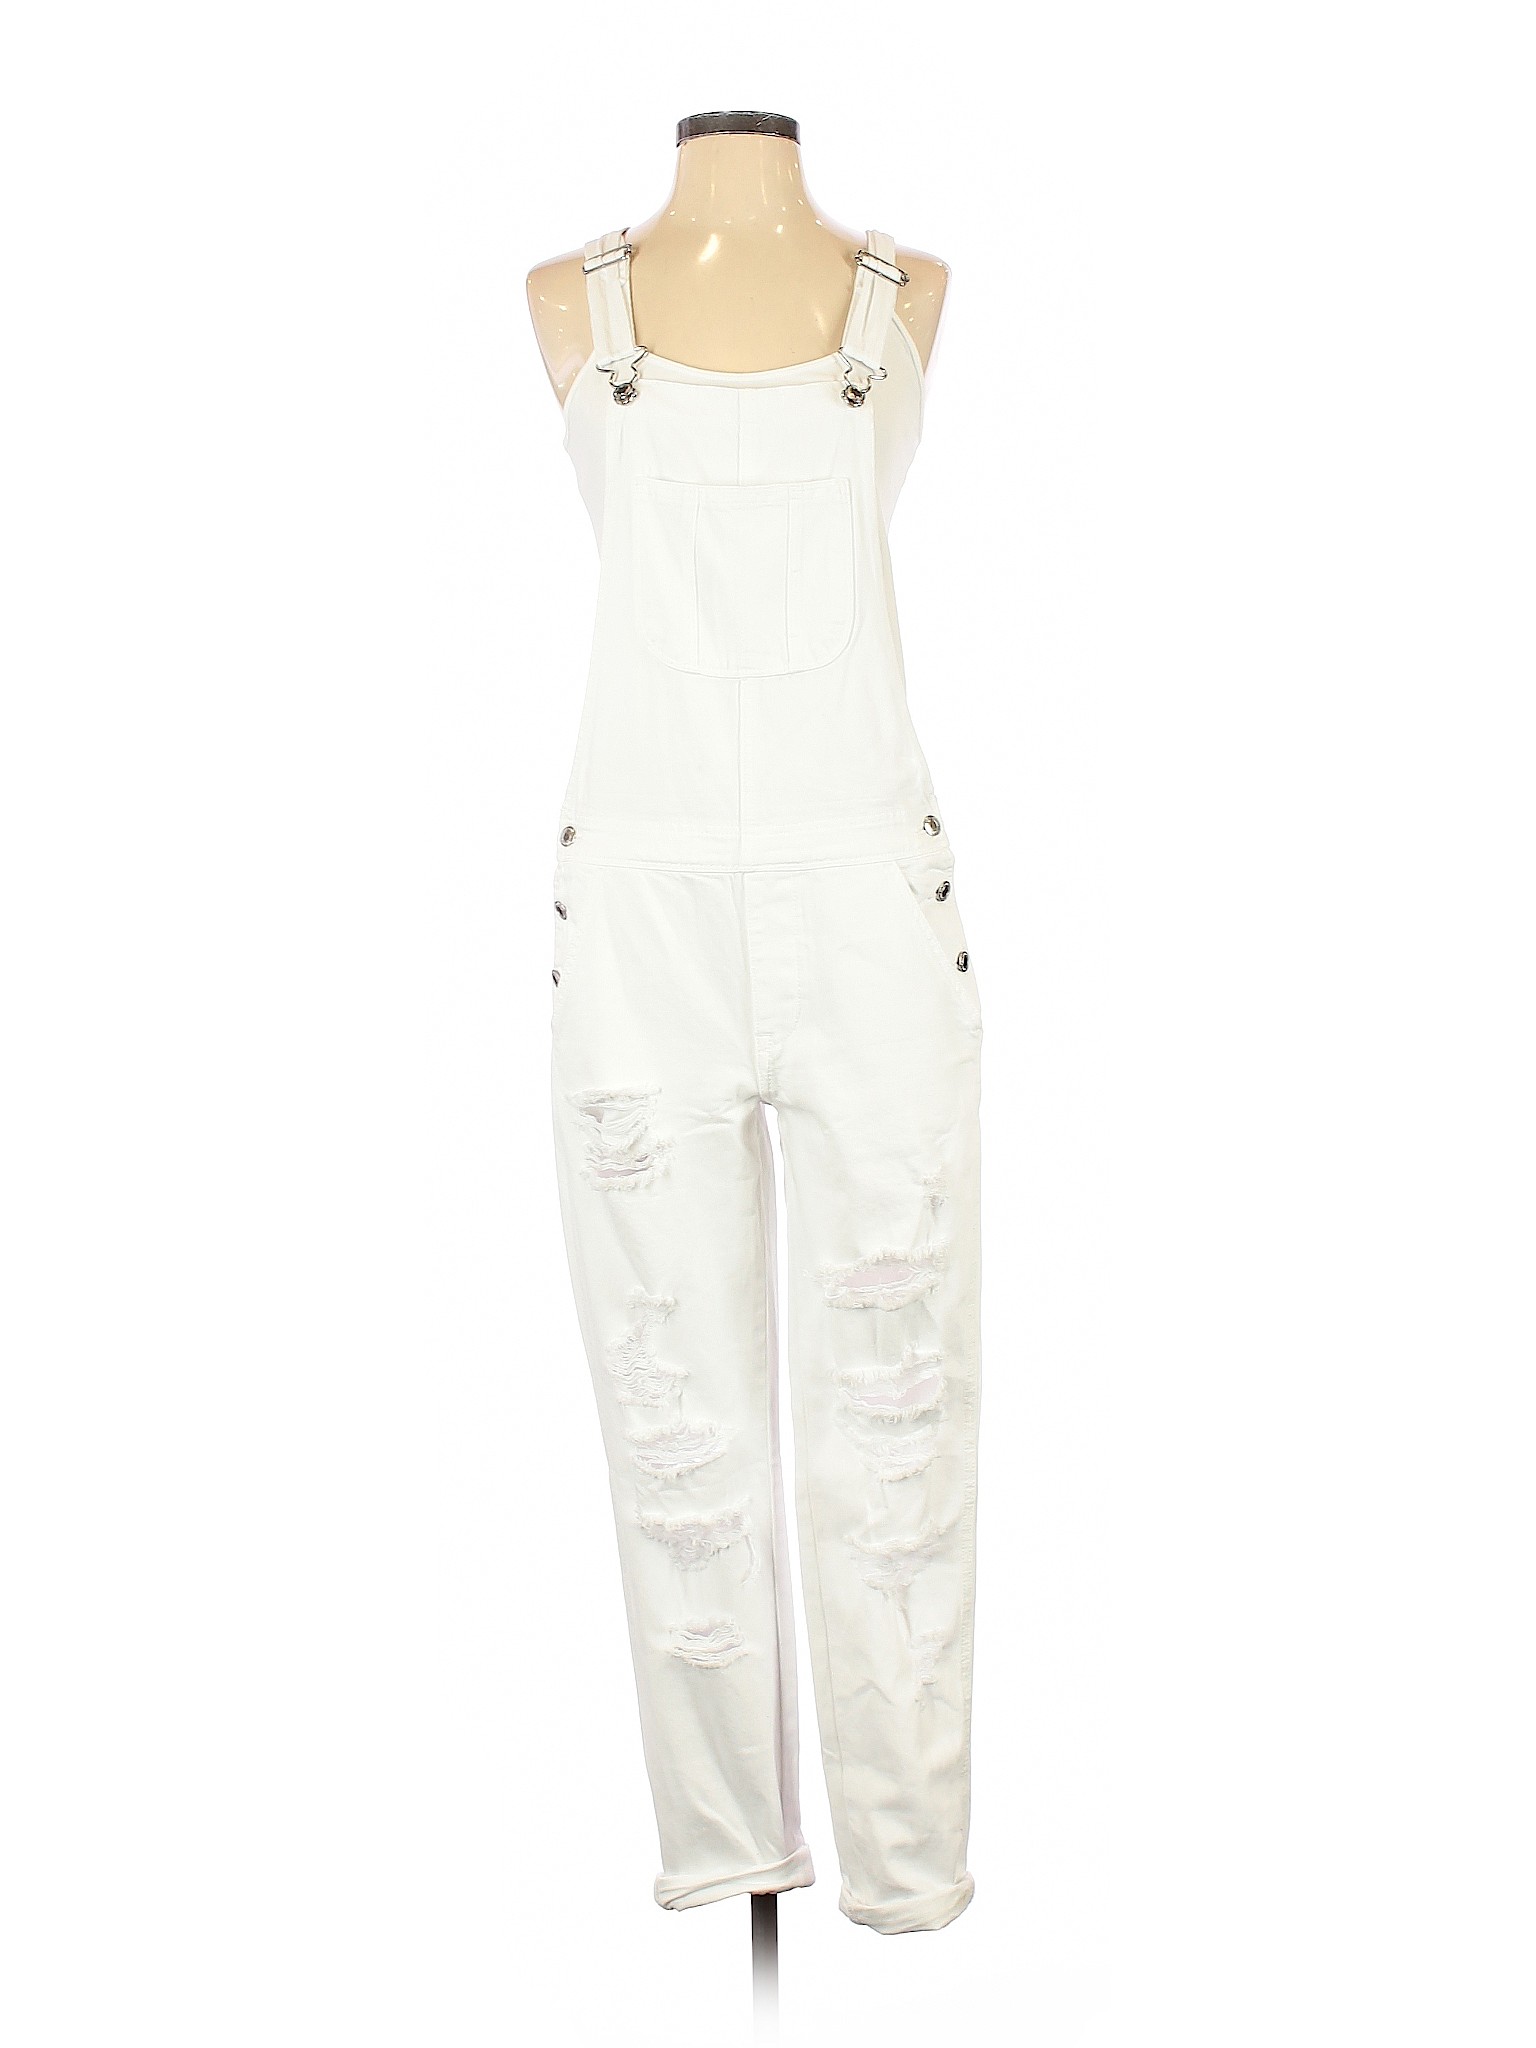 American Eagle Outfitters 100% Cotton Solid White Overalls Size S - 57% ...